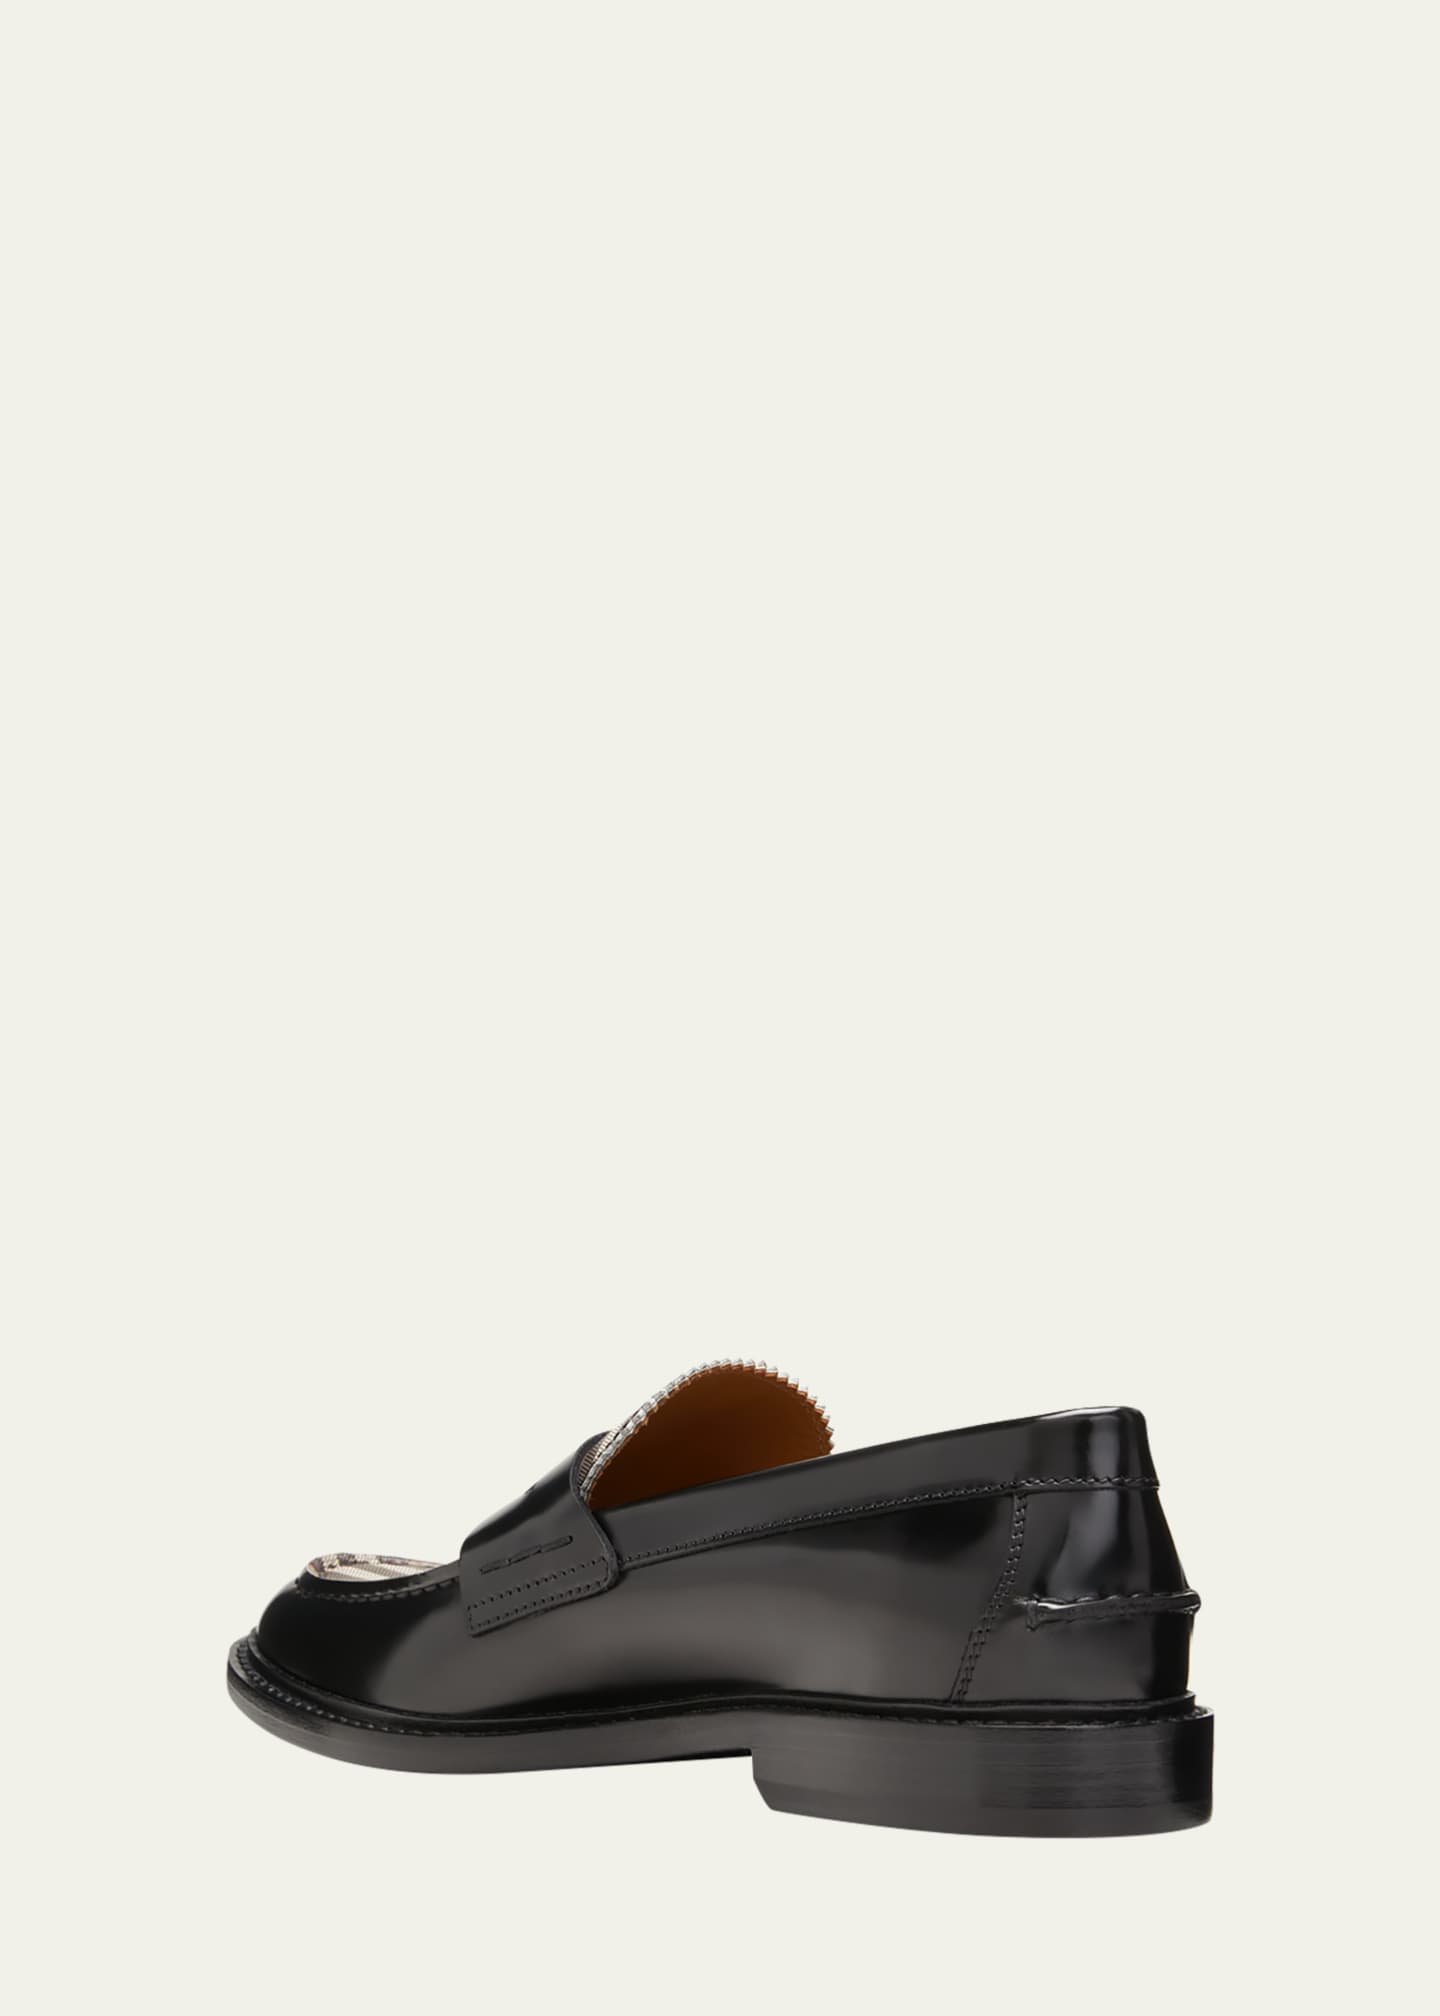 Burberry Shane Check Penny Loafers - Bergdorf Goodman